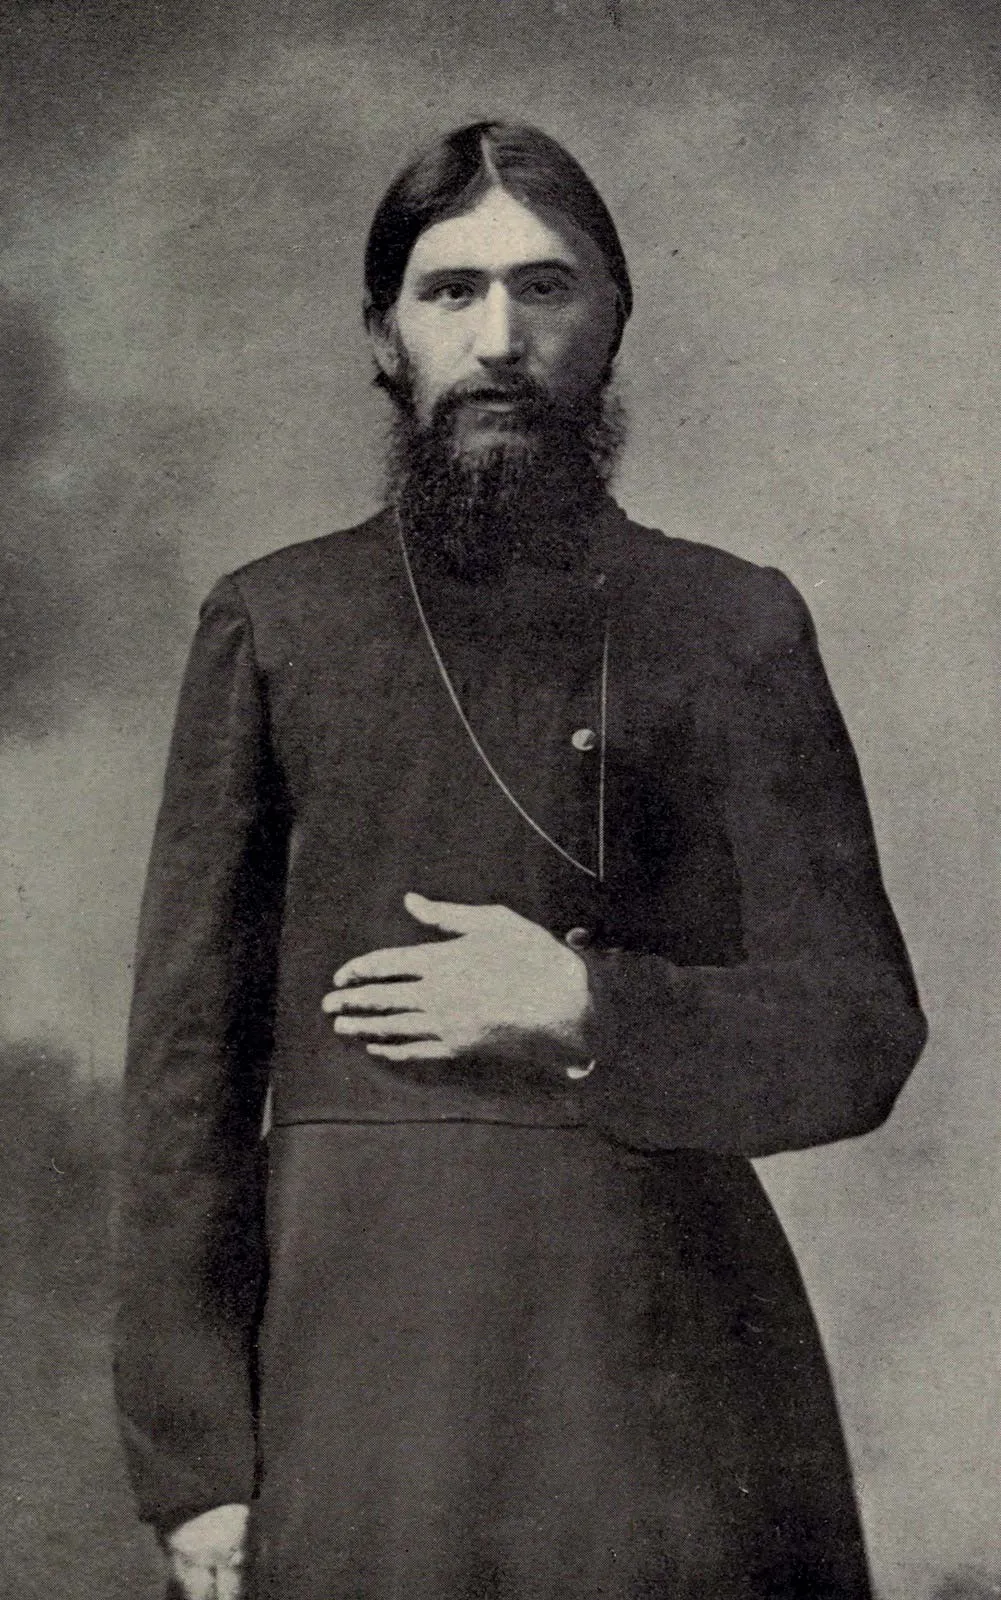 Grigori Rasputin - The Rise and Fall of the Most Famous Criminals in History